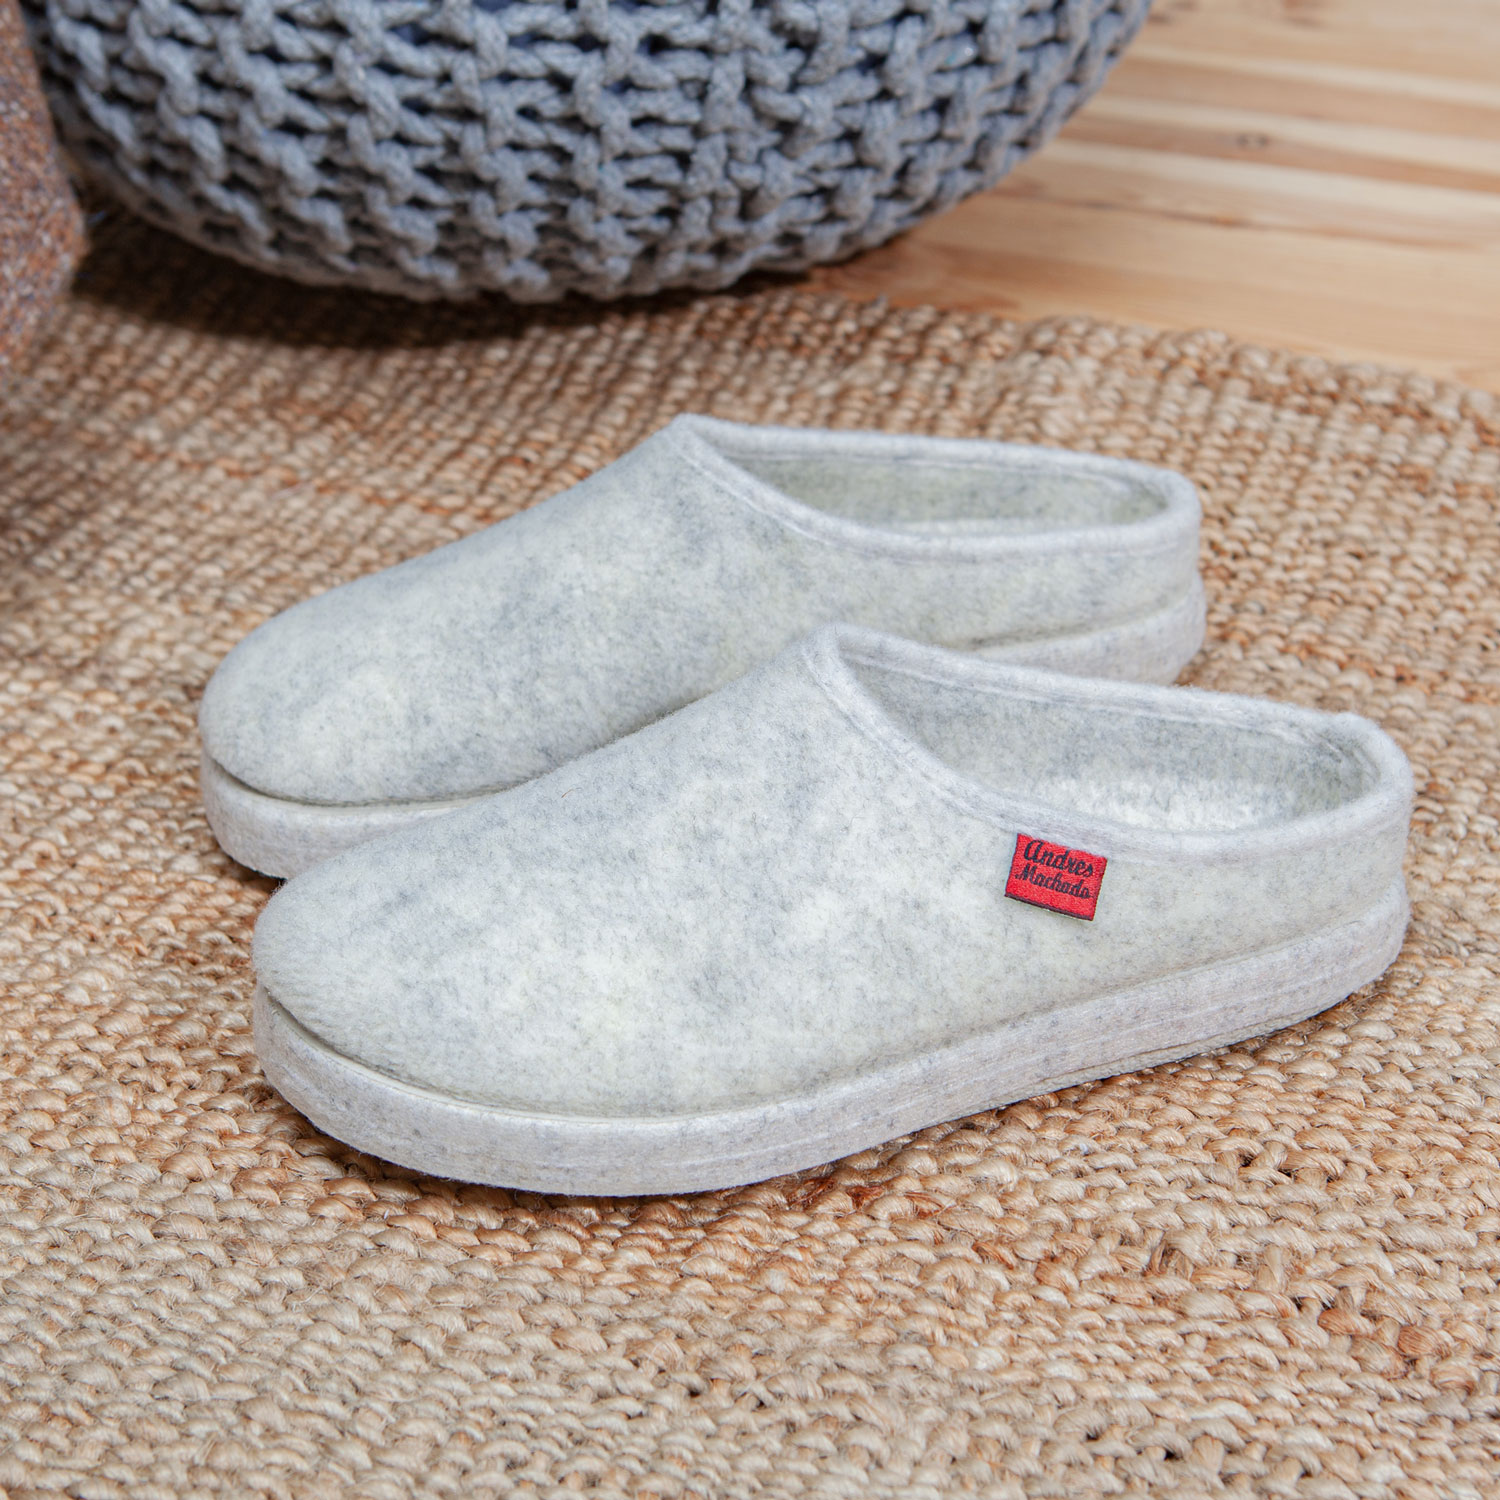 Very comfortable White Felt Slippers with footbed 